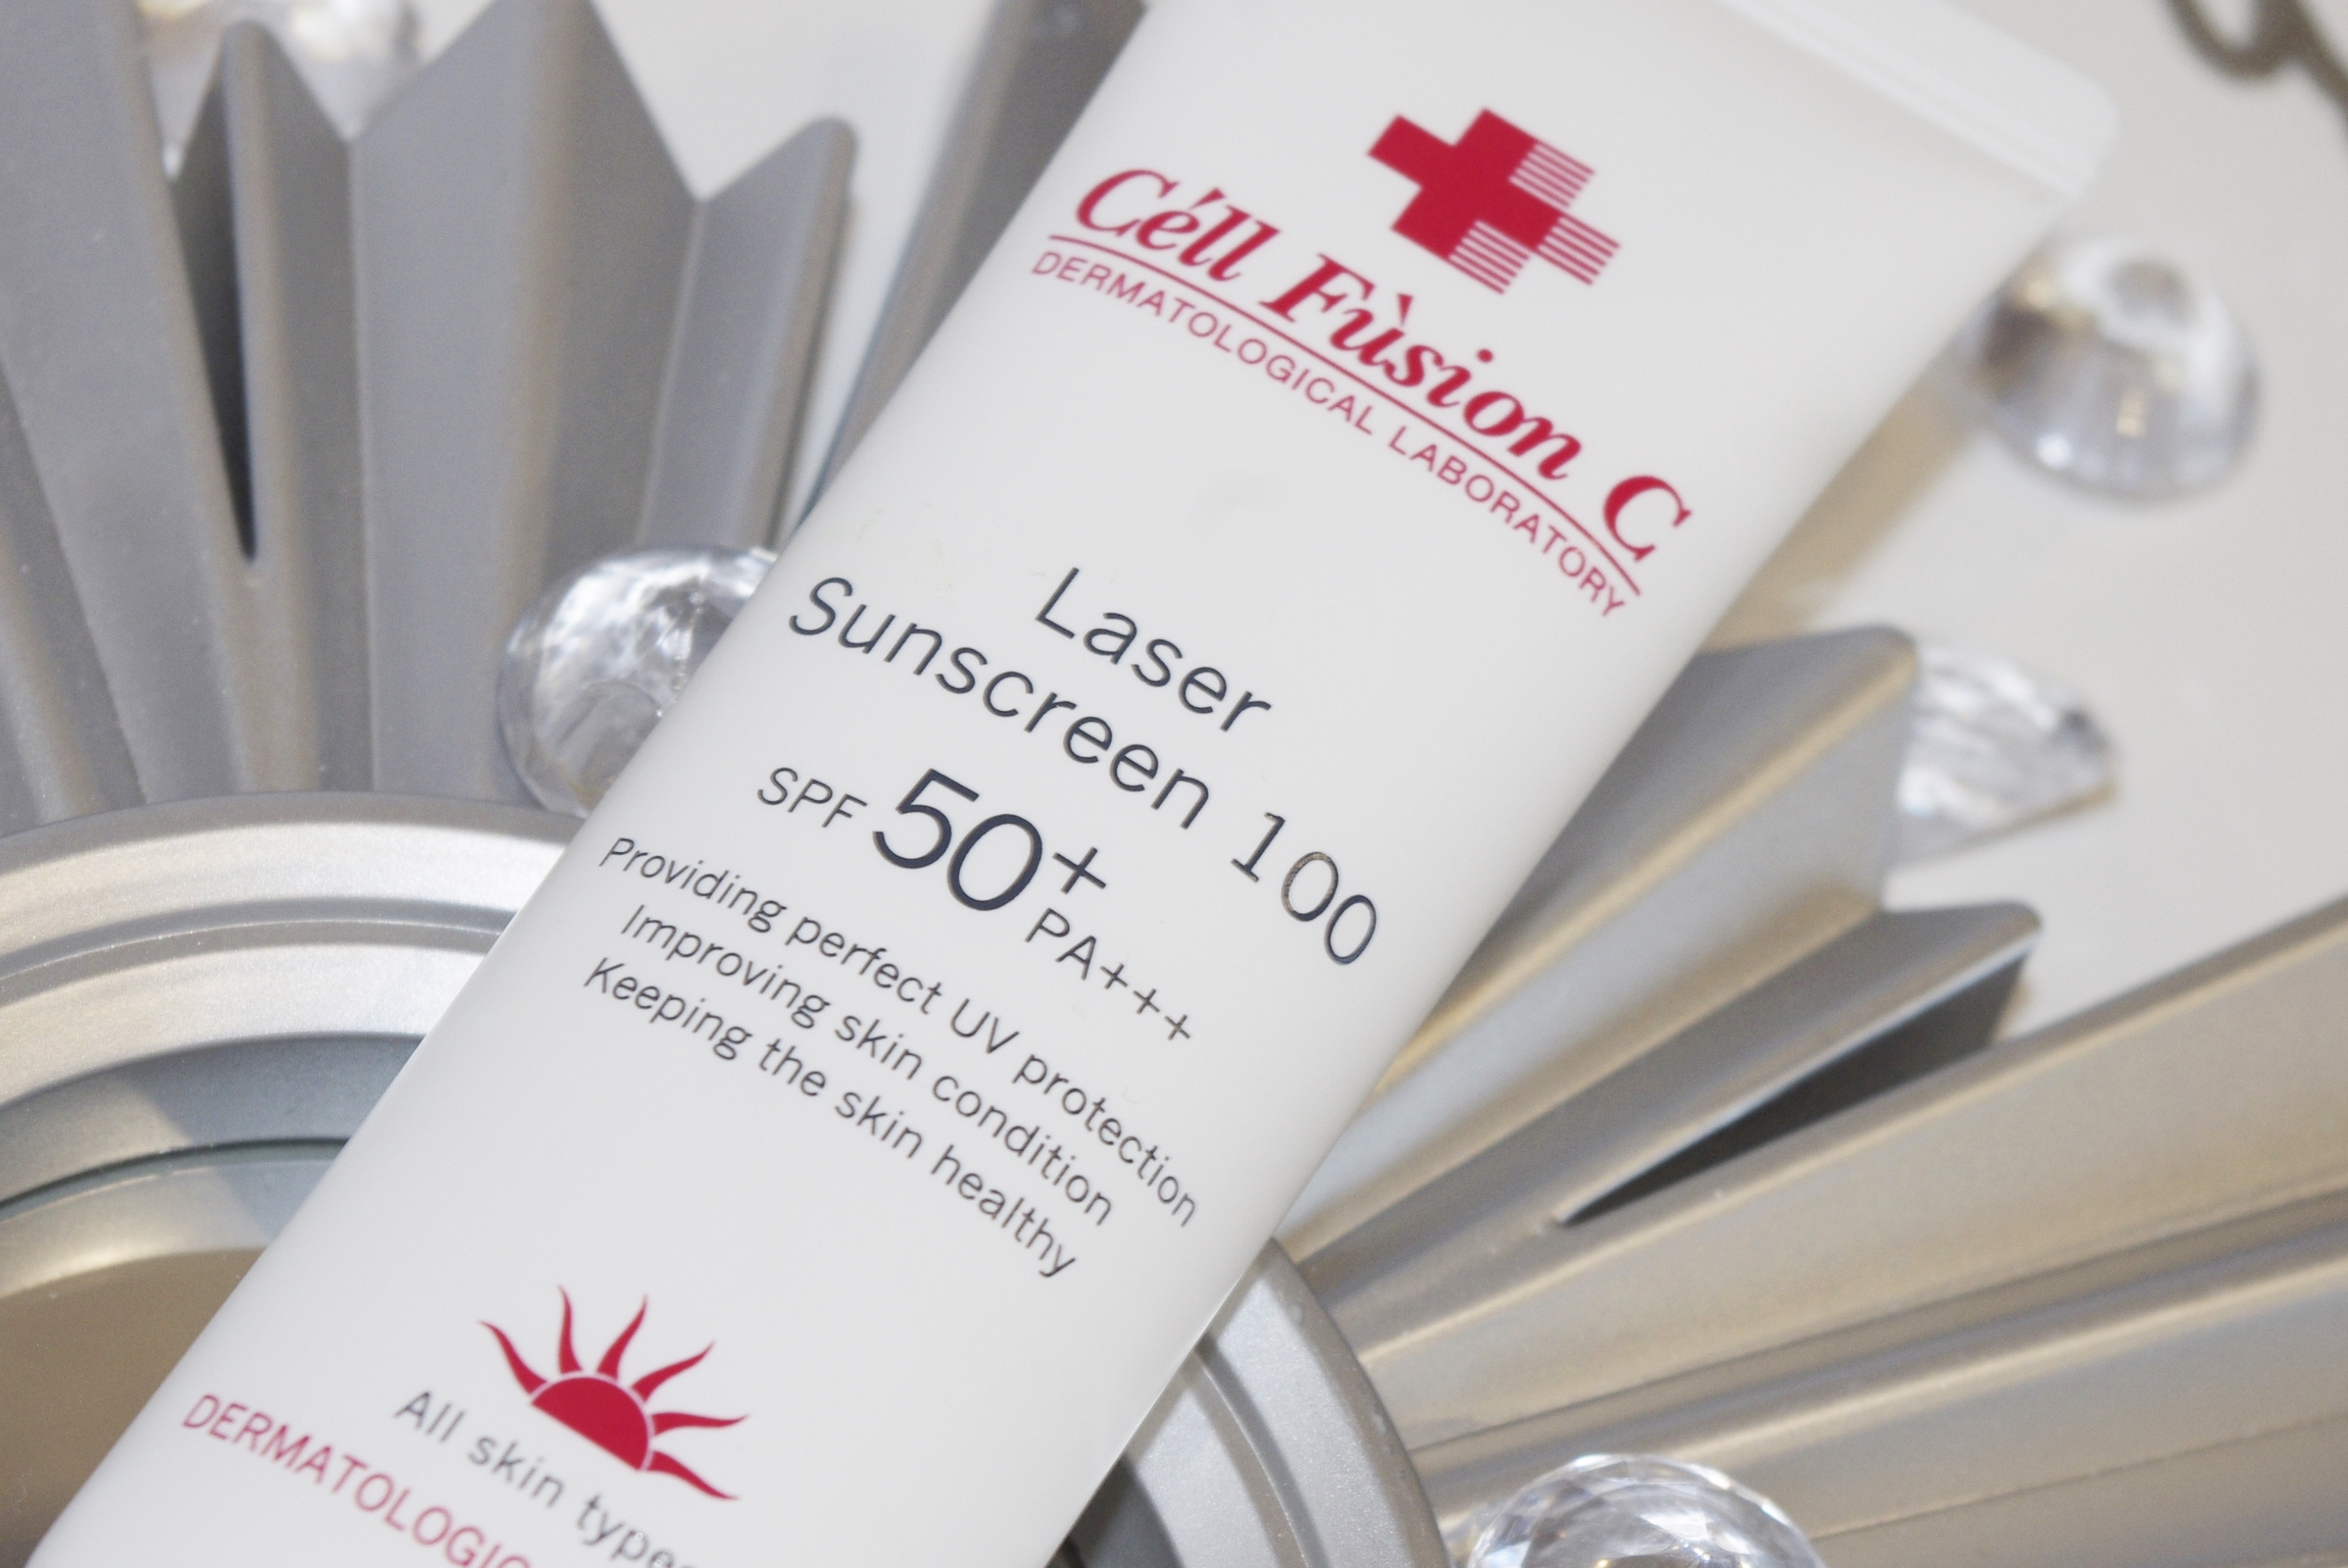 Cell Fusion C Laser Sunscreen 100 SPF 50+/PA+++